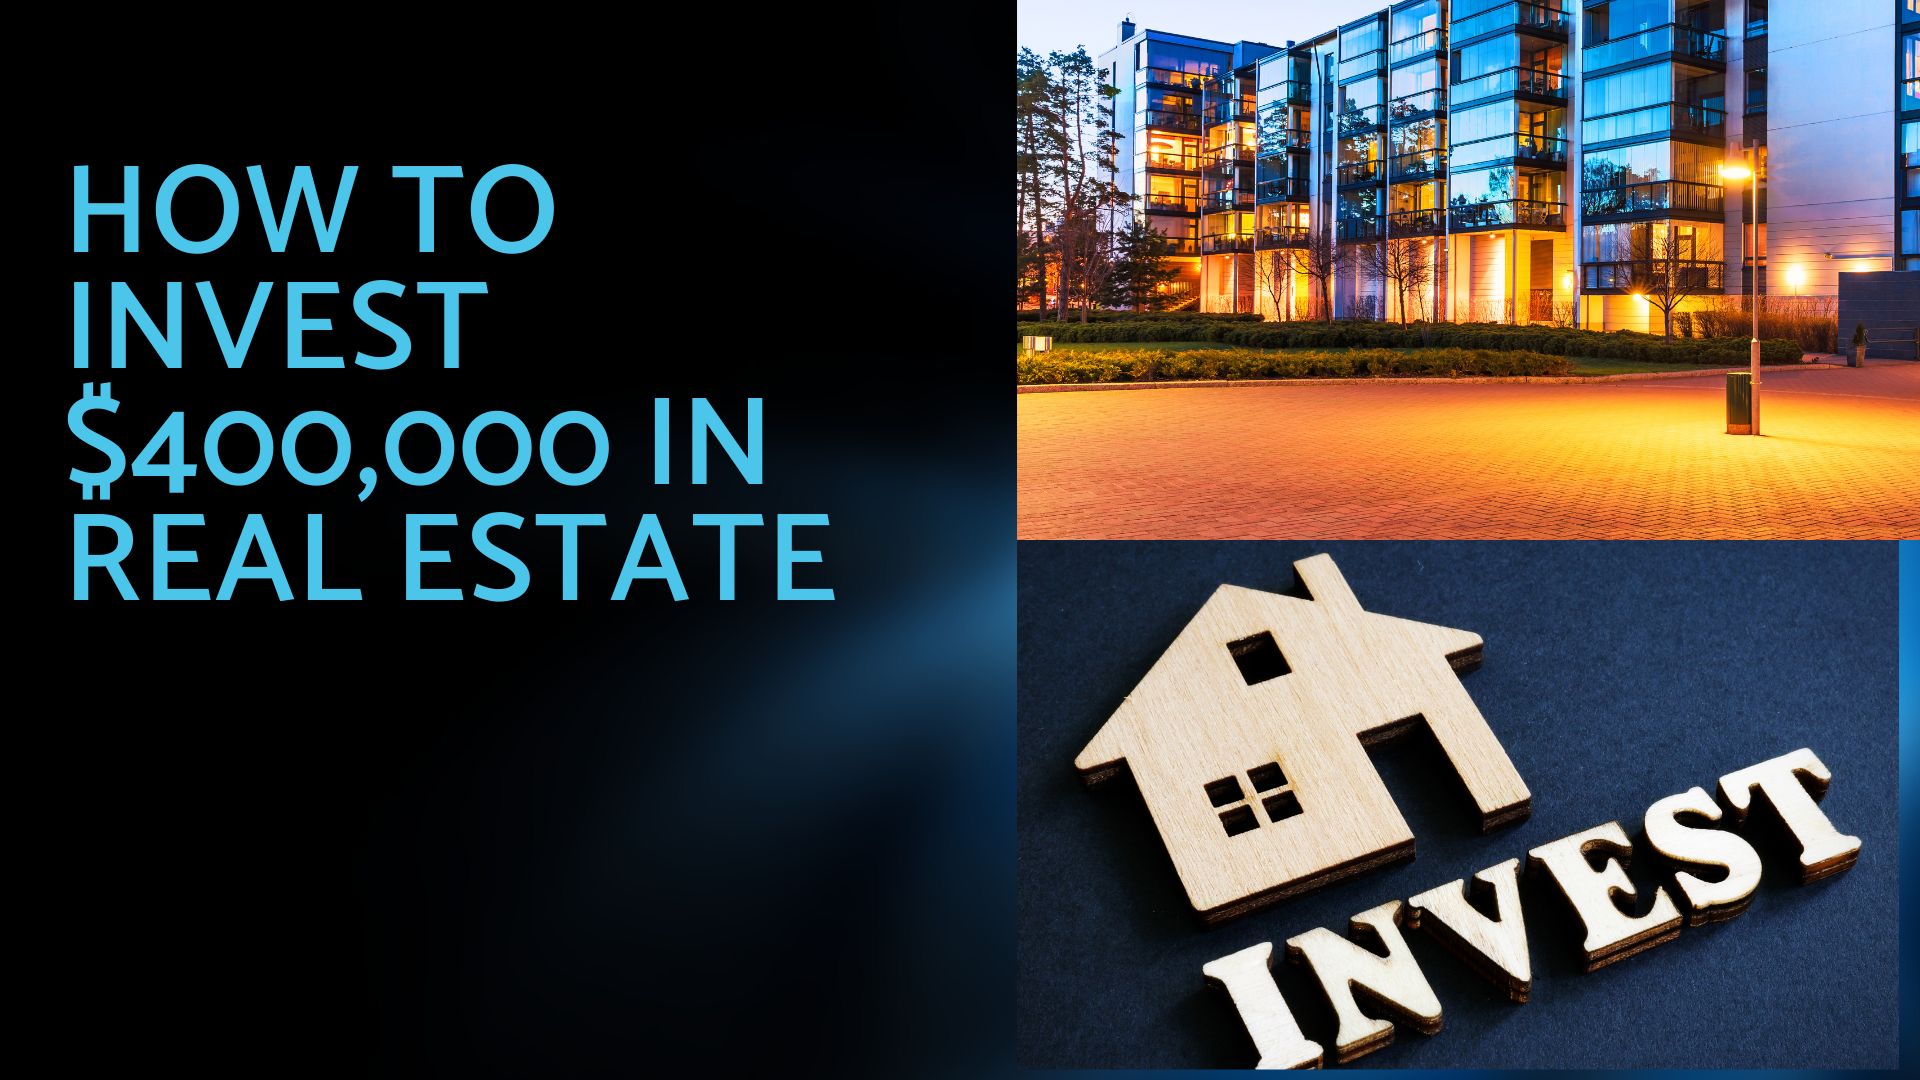 How to Invest $400,000 in Real Estate